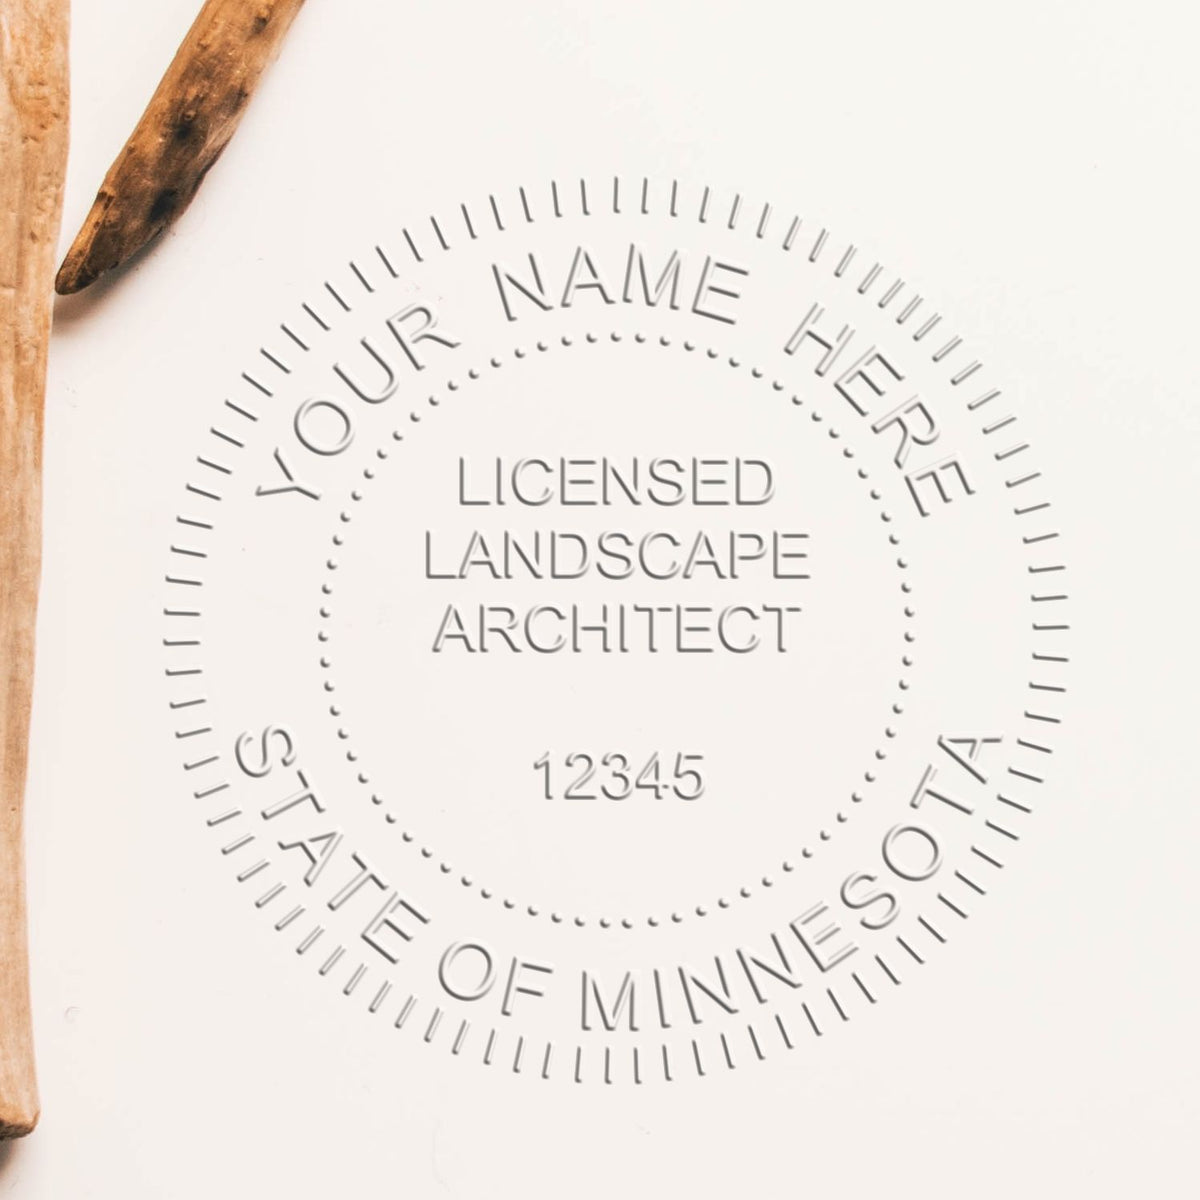 A stamped impression of the Soft Pocket Minnesota Landscape Architect Embosser in this stylish lifestyle photo, setting the tone for a unique and personalized product.